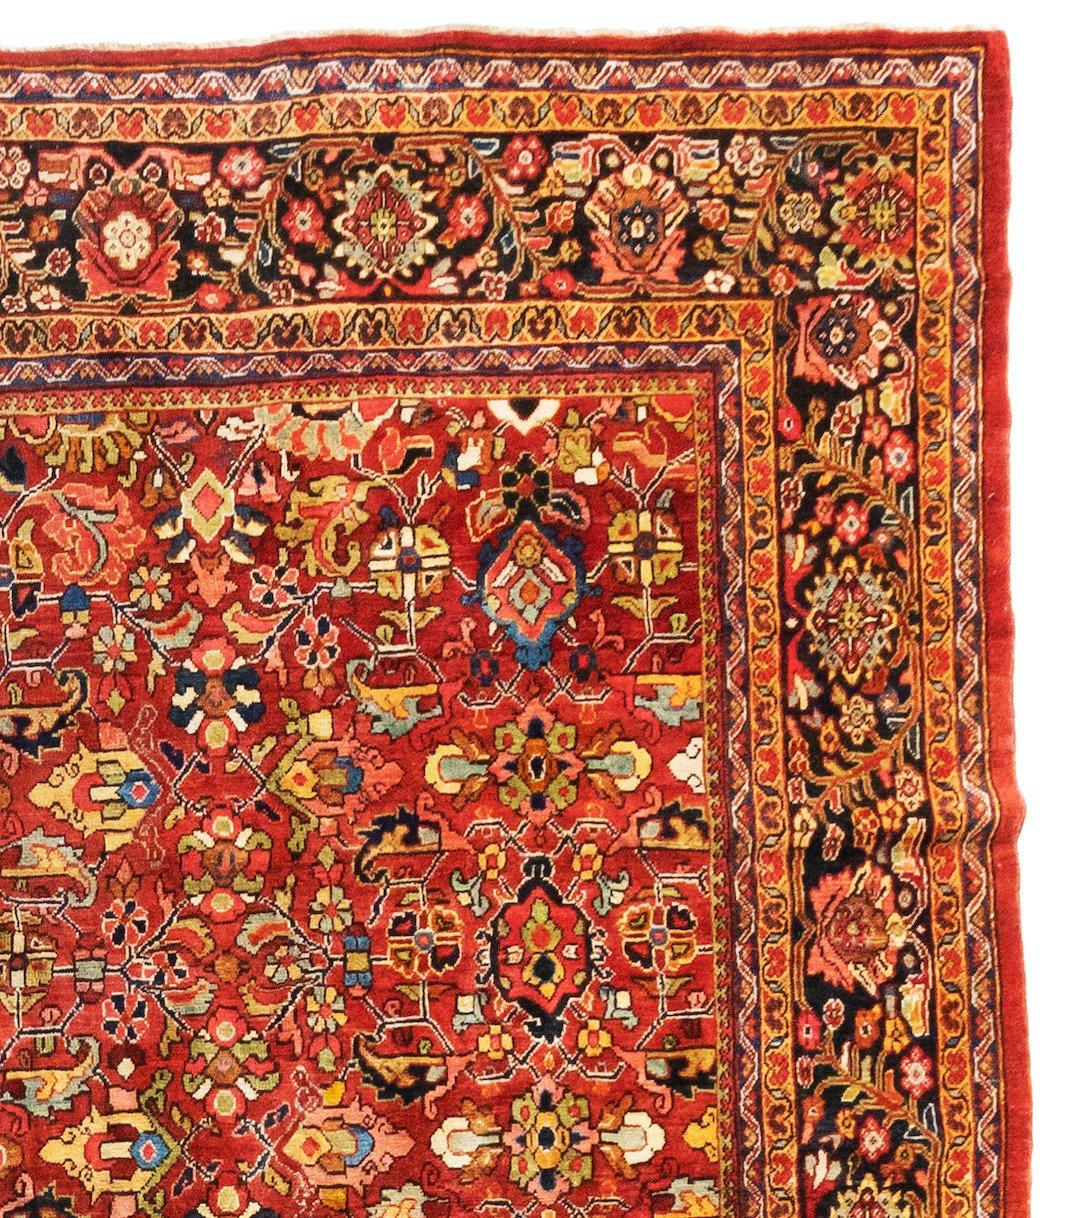 Hand-Knotted Oversize Antique Persian Red Gold Floral Mahal Ziegler Large Area Rug, c. 1930s